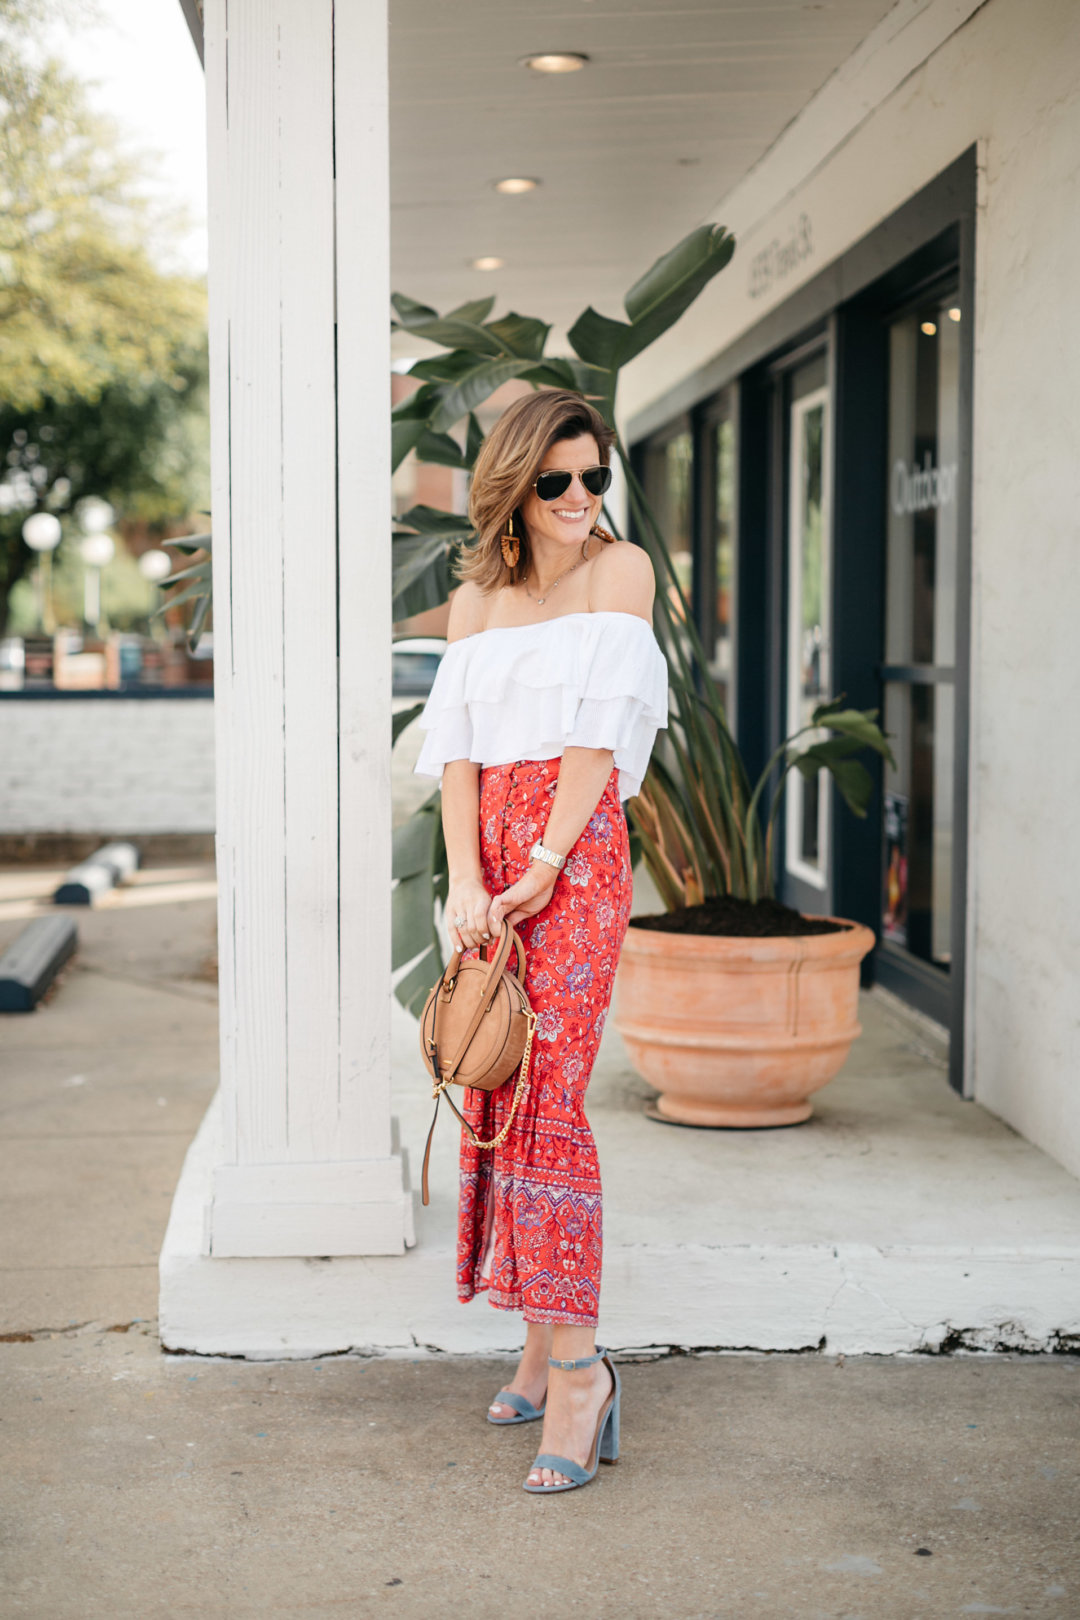 https://www.brightontheday.com/wp-content/uploads/2018/04/ruffle-crop-top-with-high-waisted-print-maxi-skirt-3-1080x1620.jpg